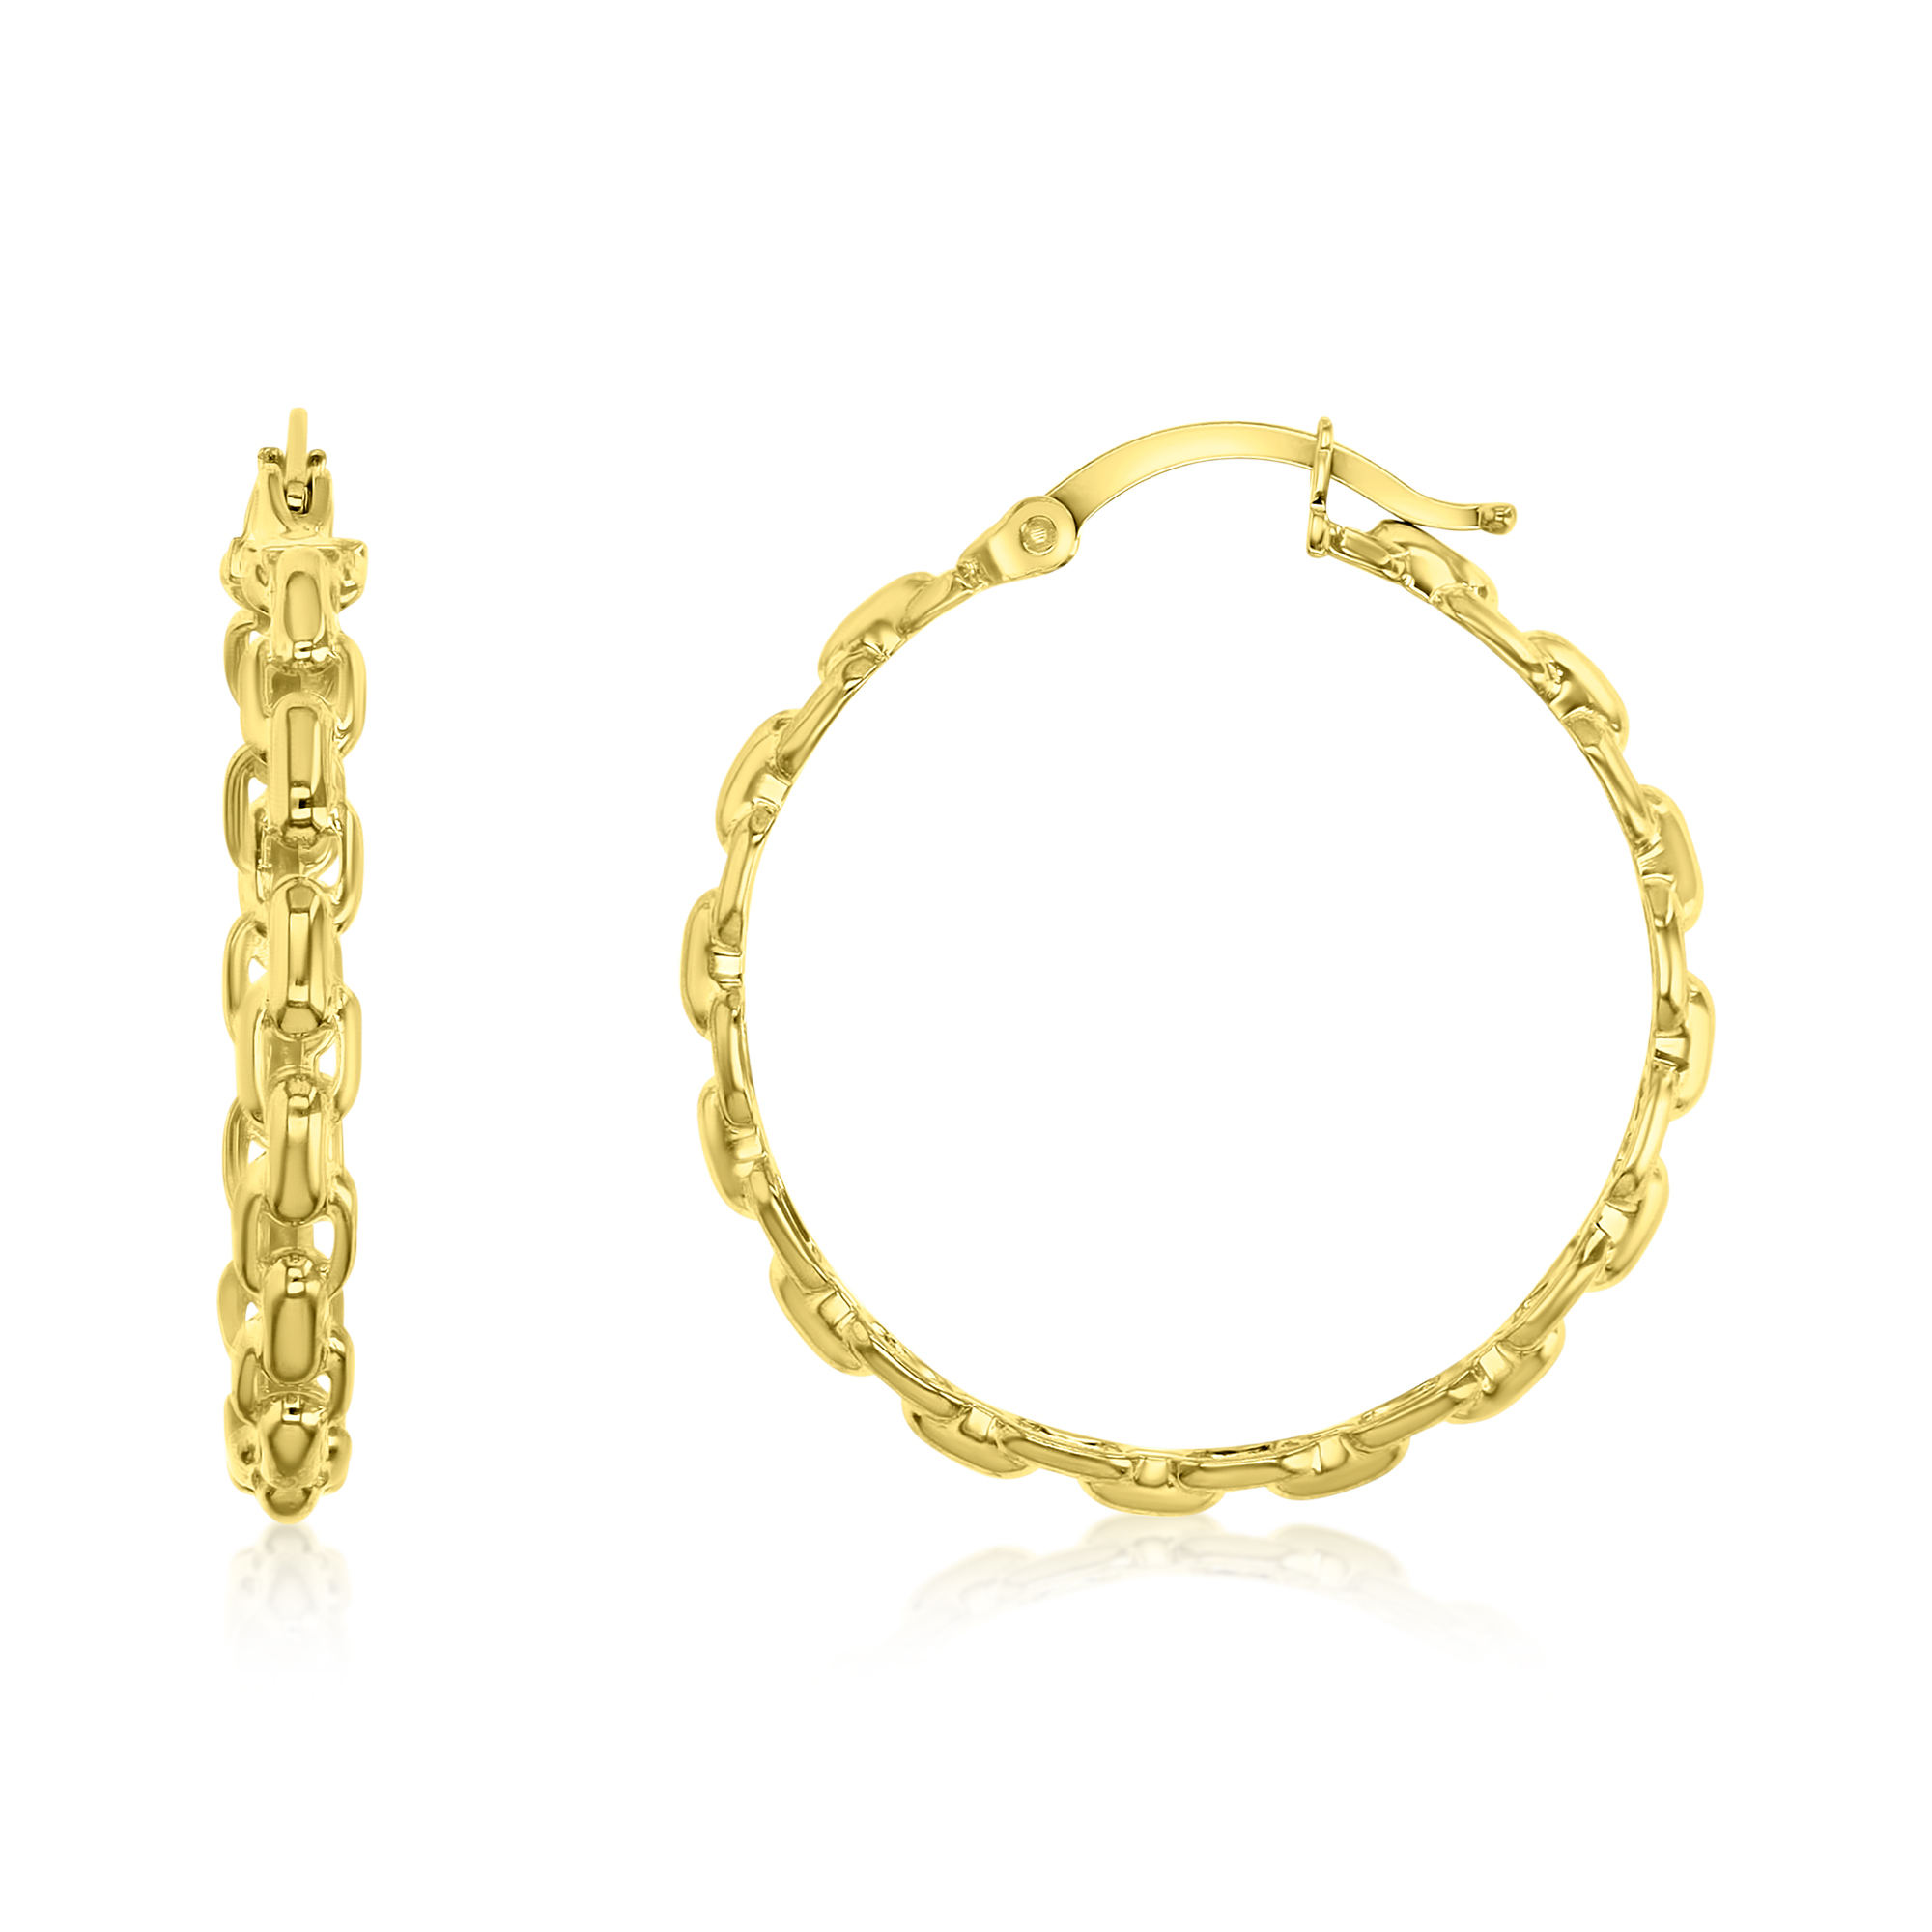 14K Yellow Gold 3x25MM Cable Link Hoop Earrings